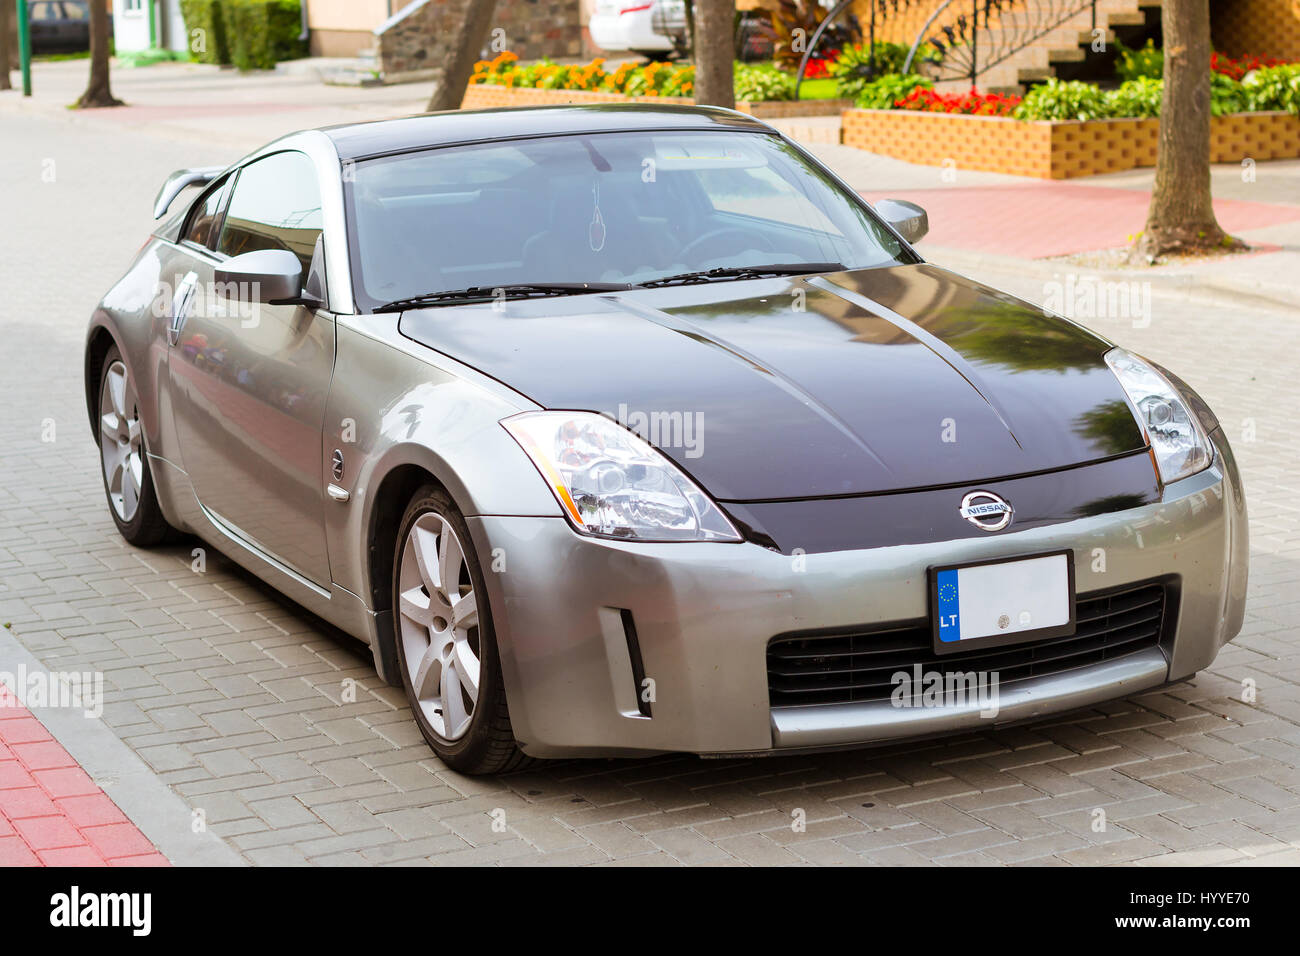 Palanga, Lithuania - August 13, 2012: Modern sports coupe car Nissan 350z parked on main transport highway in Lithuanian resort town Palanga. Youth hi Stock Photo